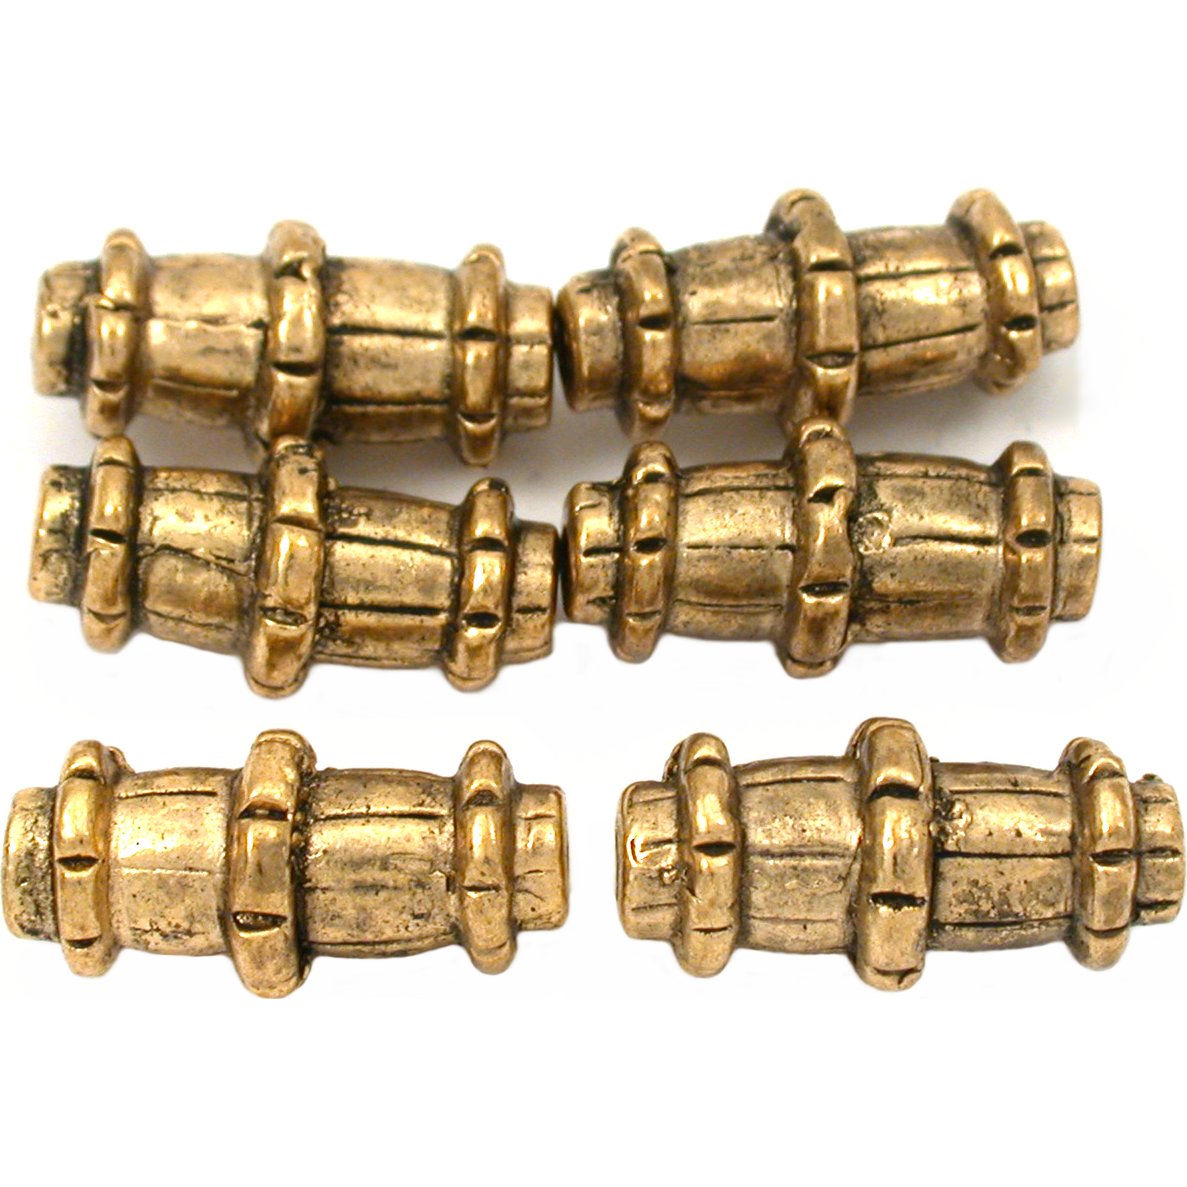 Bali Tube Antique Gold Plated Beads 17mm 15 Grams 6Pcs Approx.